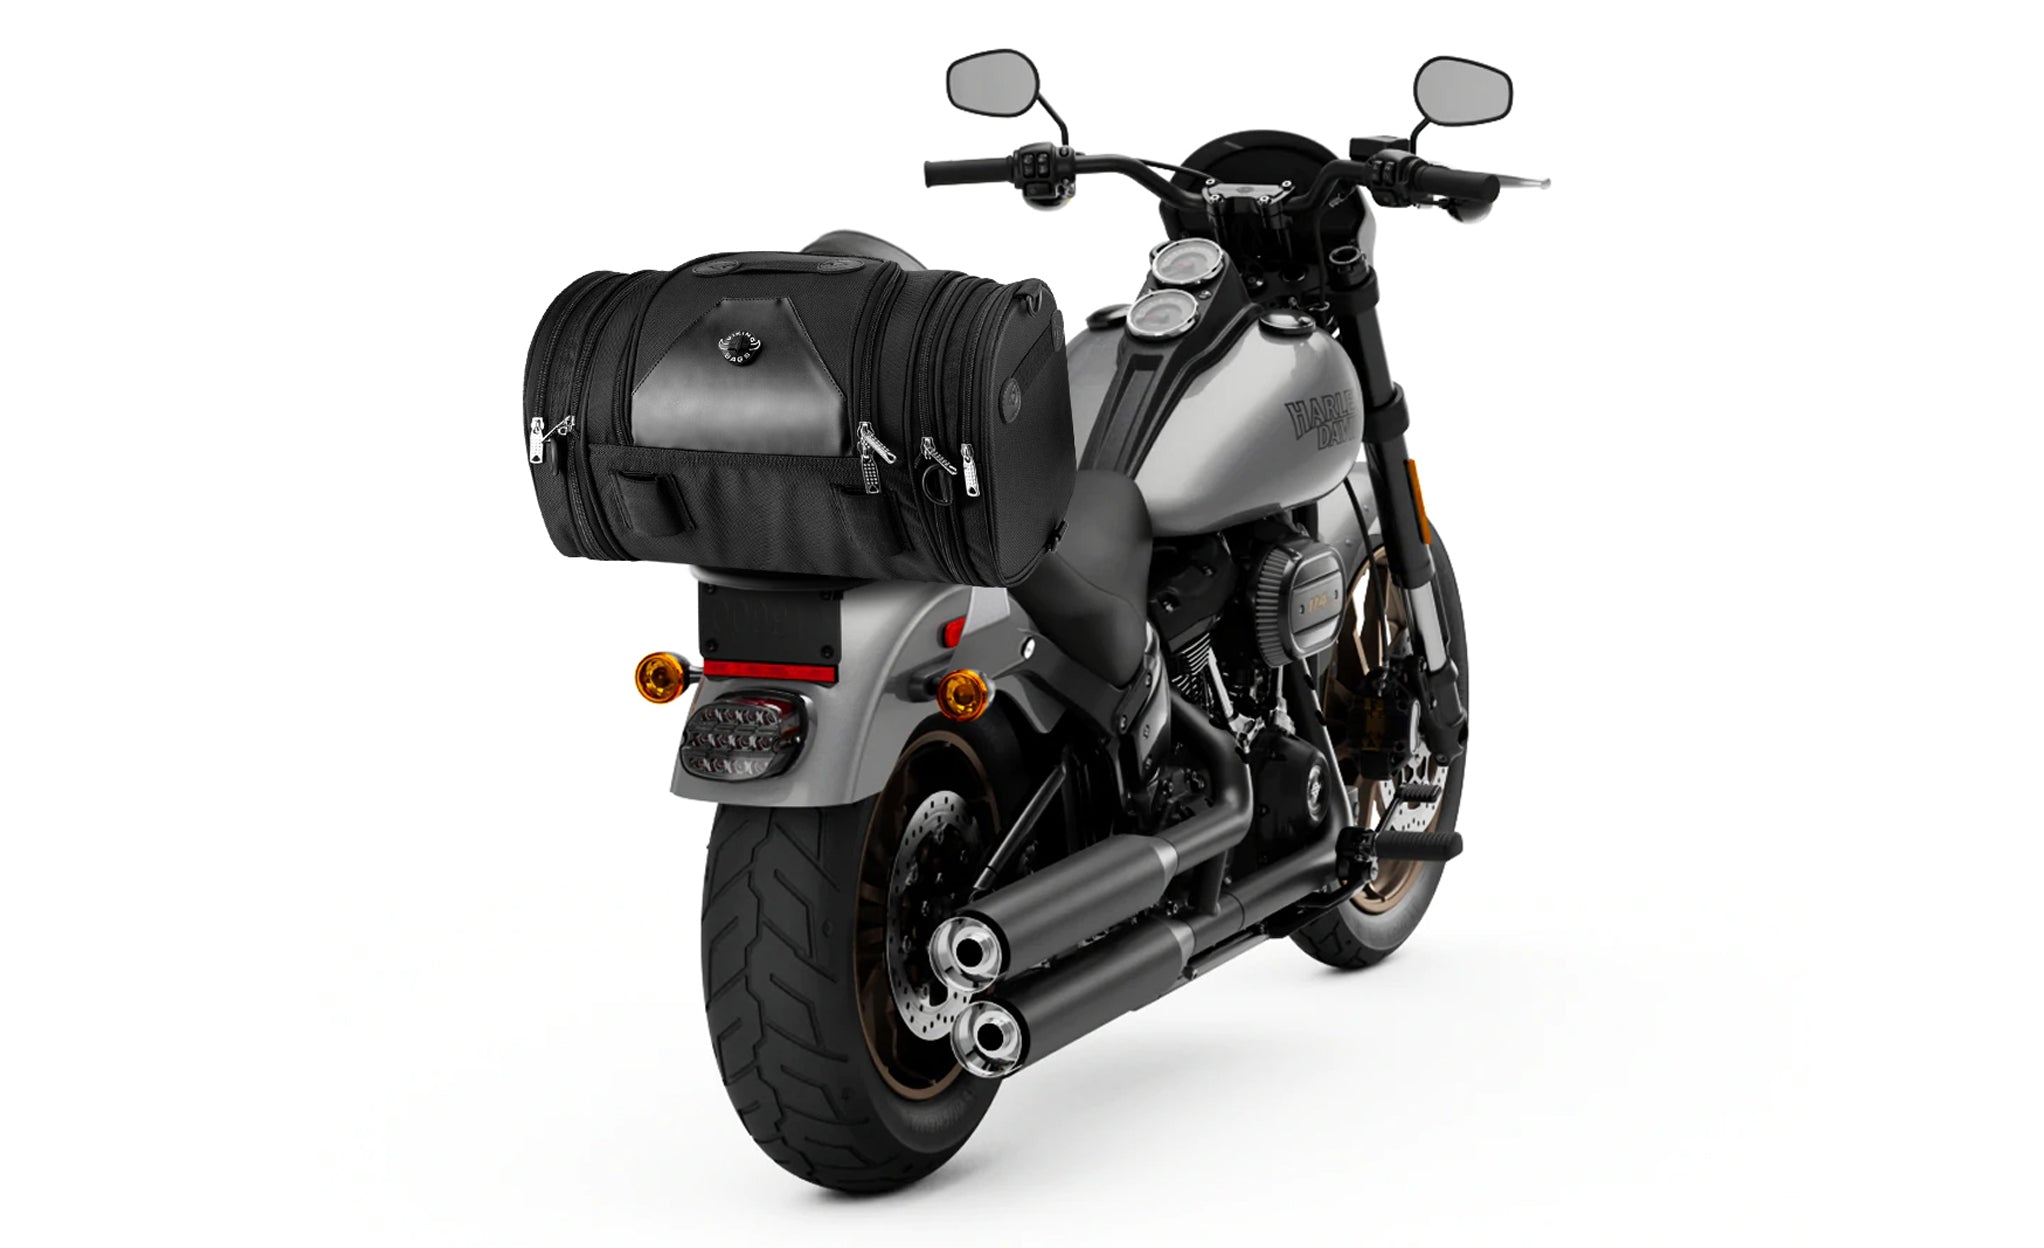 Viking Axwell Small Motorcycle Tail Bag for Harley Davidson Bag on Bike View @expand